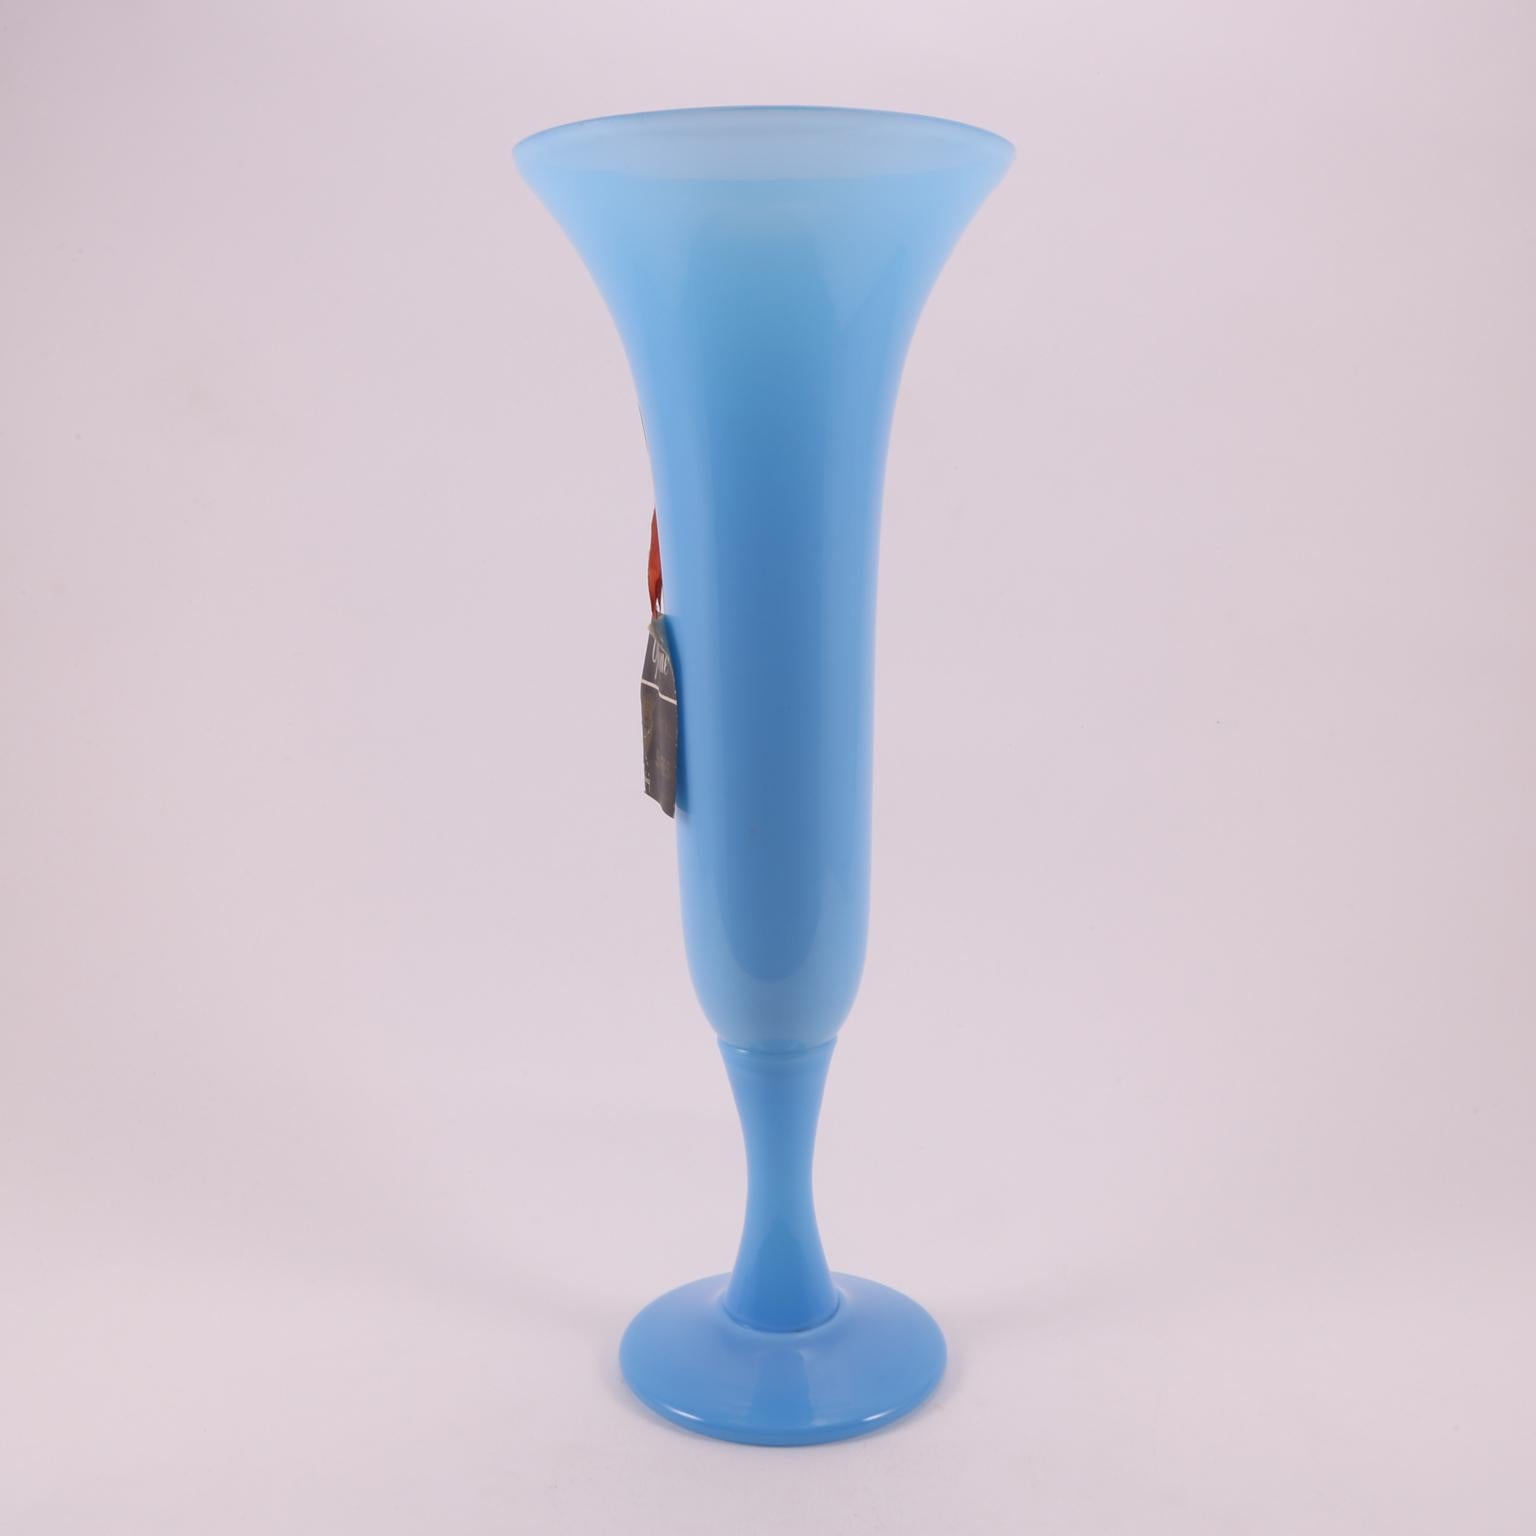 Mid-20th Century Art Deco French Sèvres Light Turquoise Handblown Opaline Glass Vase, 1930 For Sale